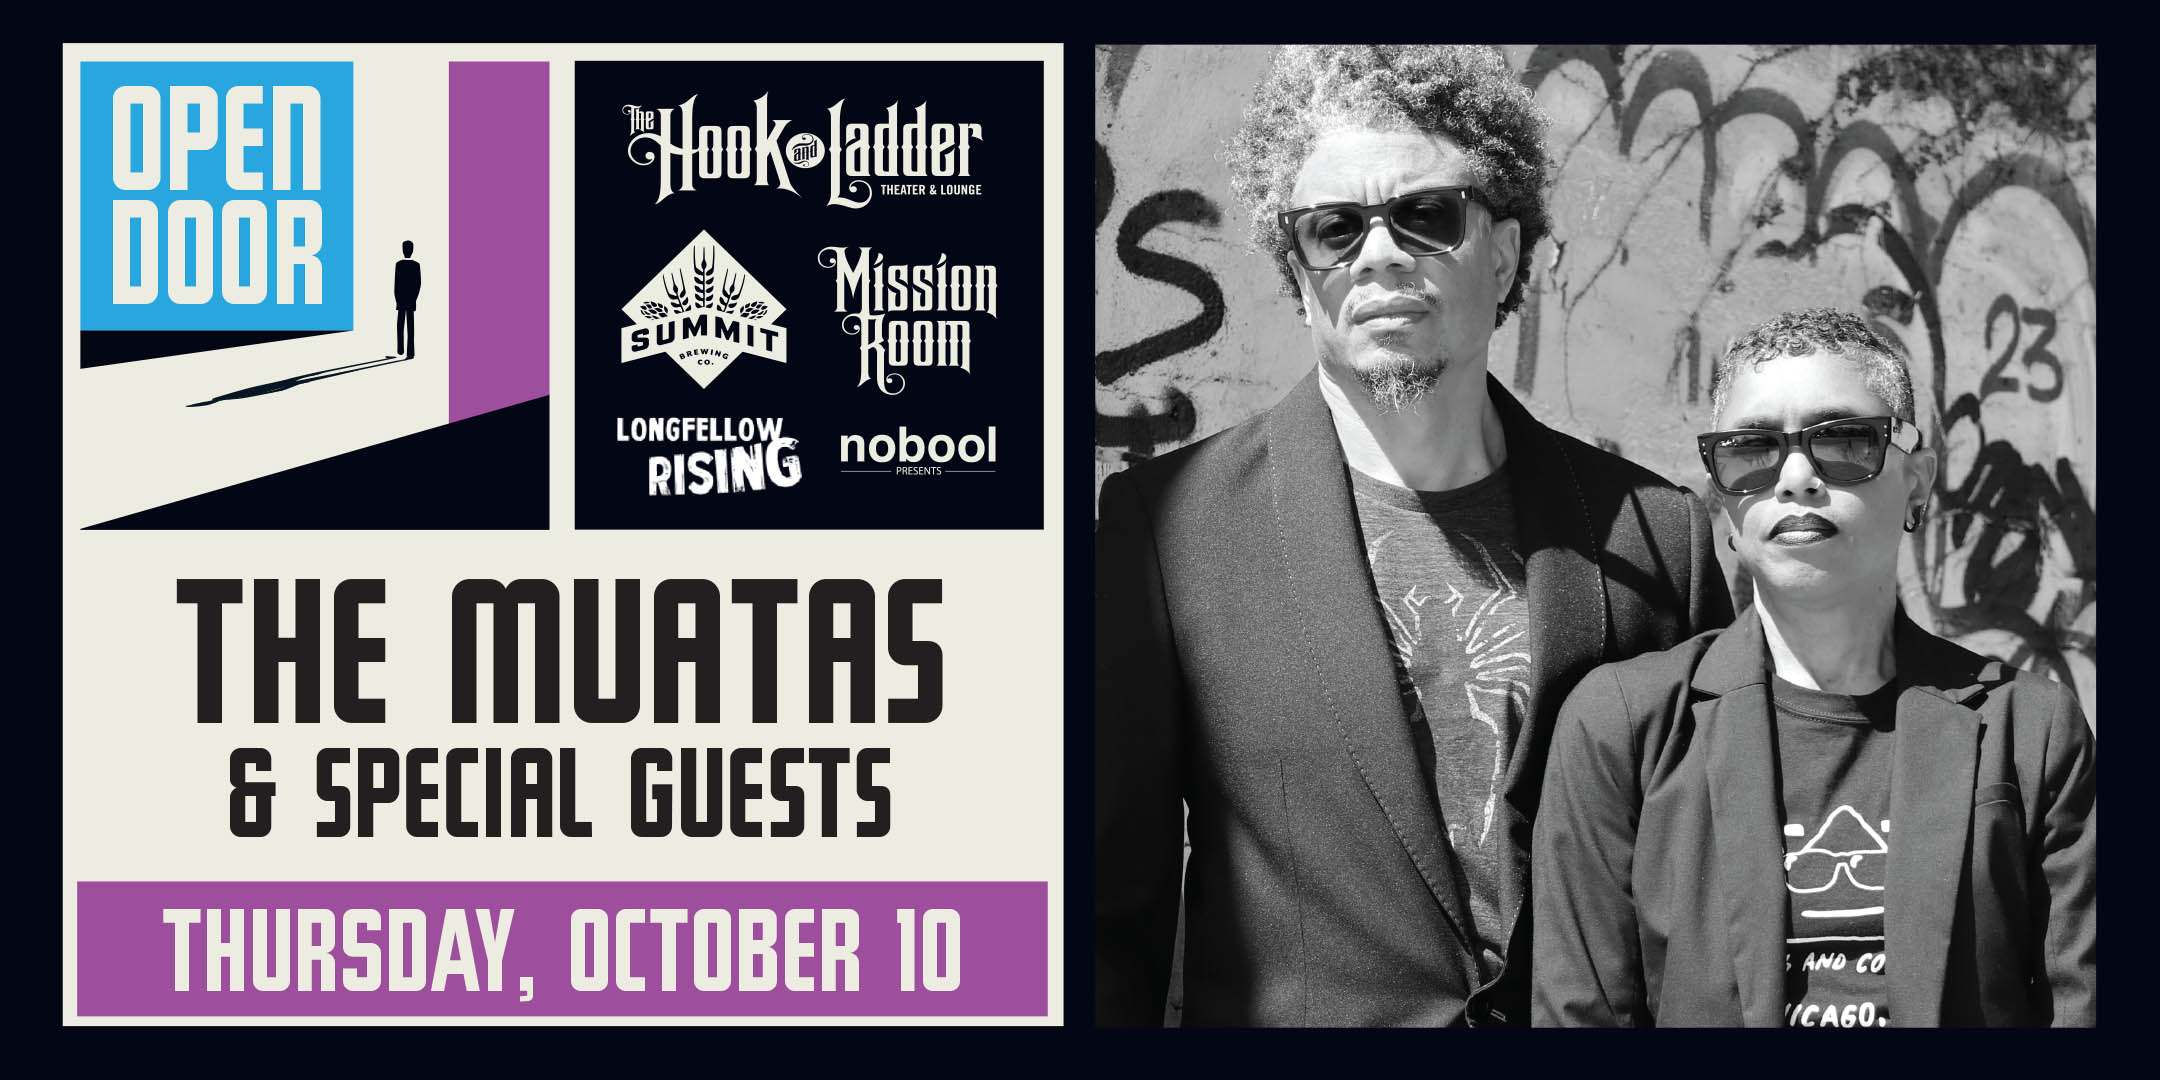 Summit Brewing, Longfellow Rising, & Windlass Presents Open Door Series: The Muatas & Special Guests Thursday, October 10 at The Hook and Ladder's Mission Room Doors 5pm :: Music 7-10pm :: 21+ FREE $5.01 Online Advance Donation (Includes a Summit Beer & 21+ Wristband*) $10 Donation at The Door (Includes a Summit Beer & 21+ Wristband*)